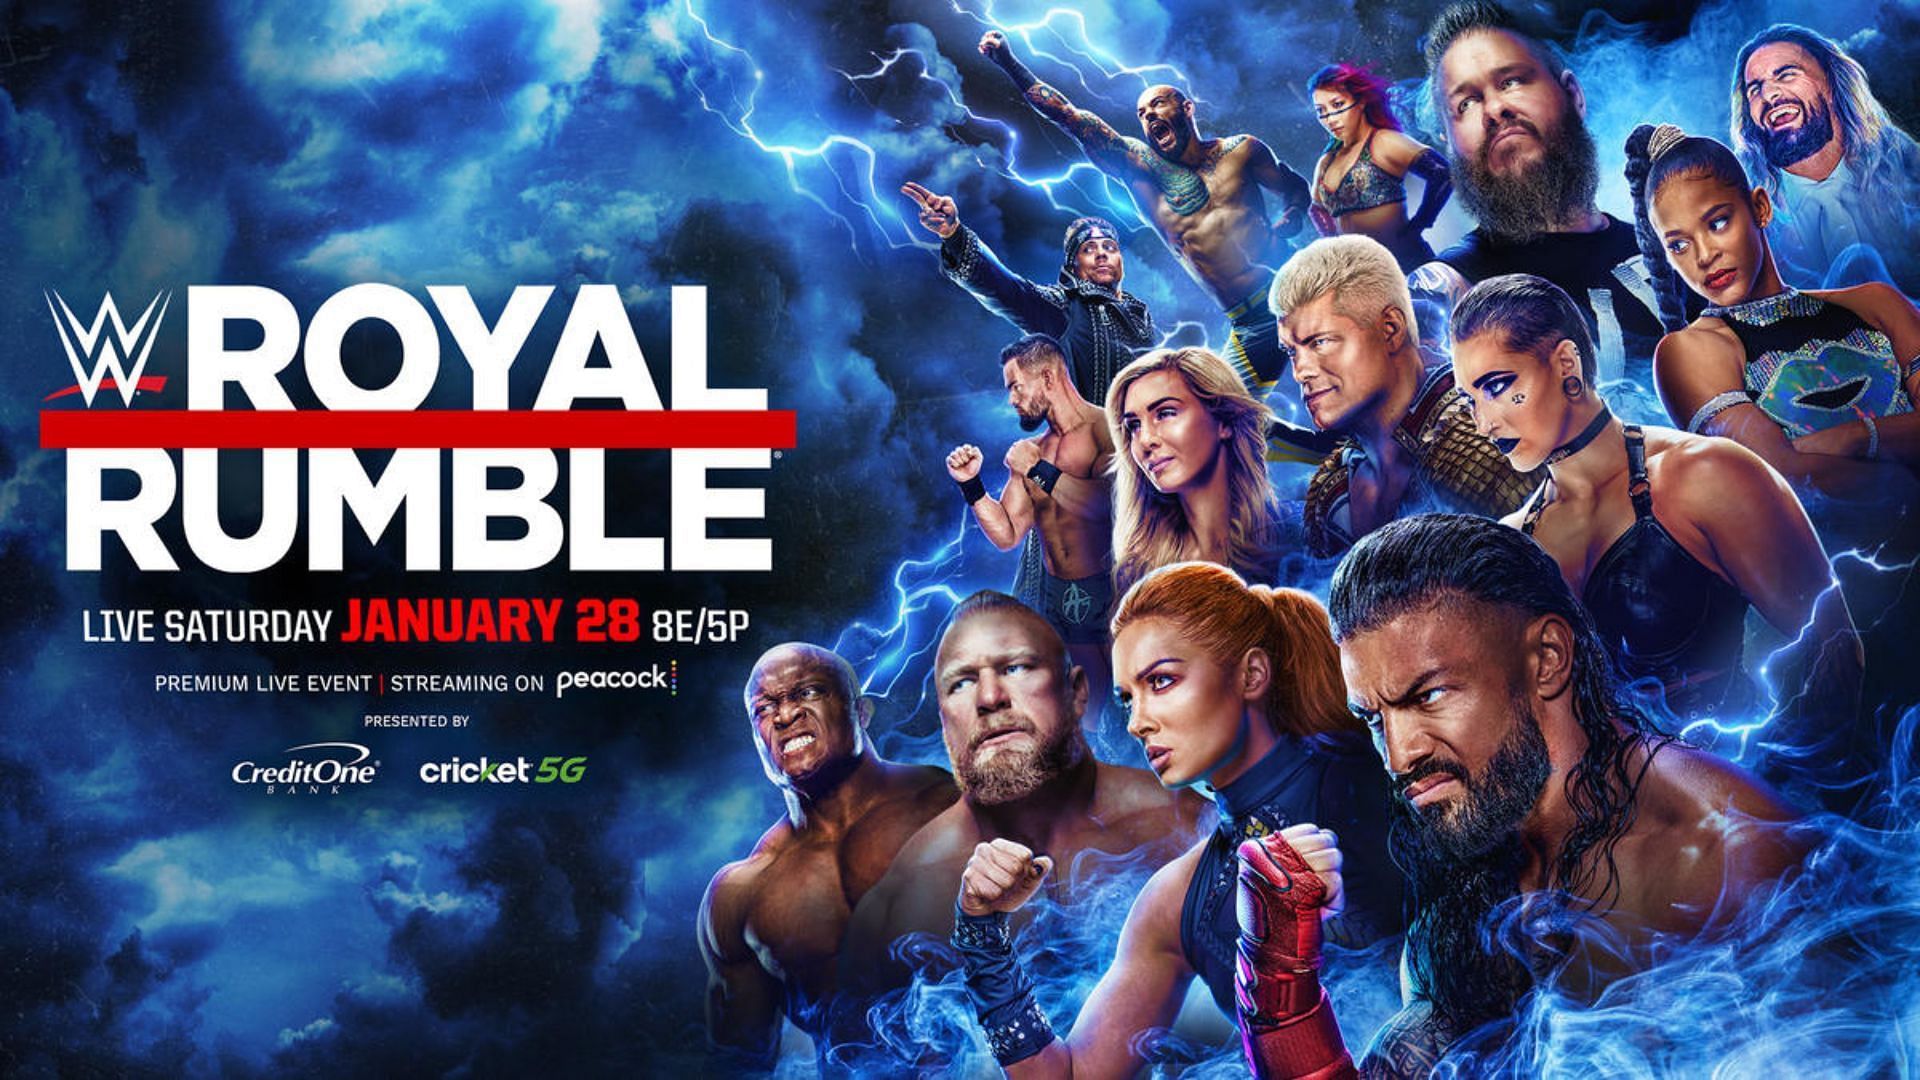 The WWE Royal Rumble will air on January 28th.